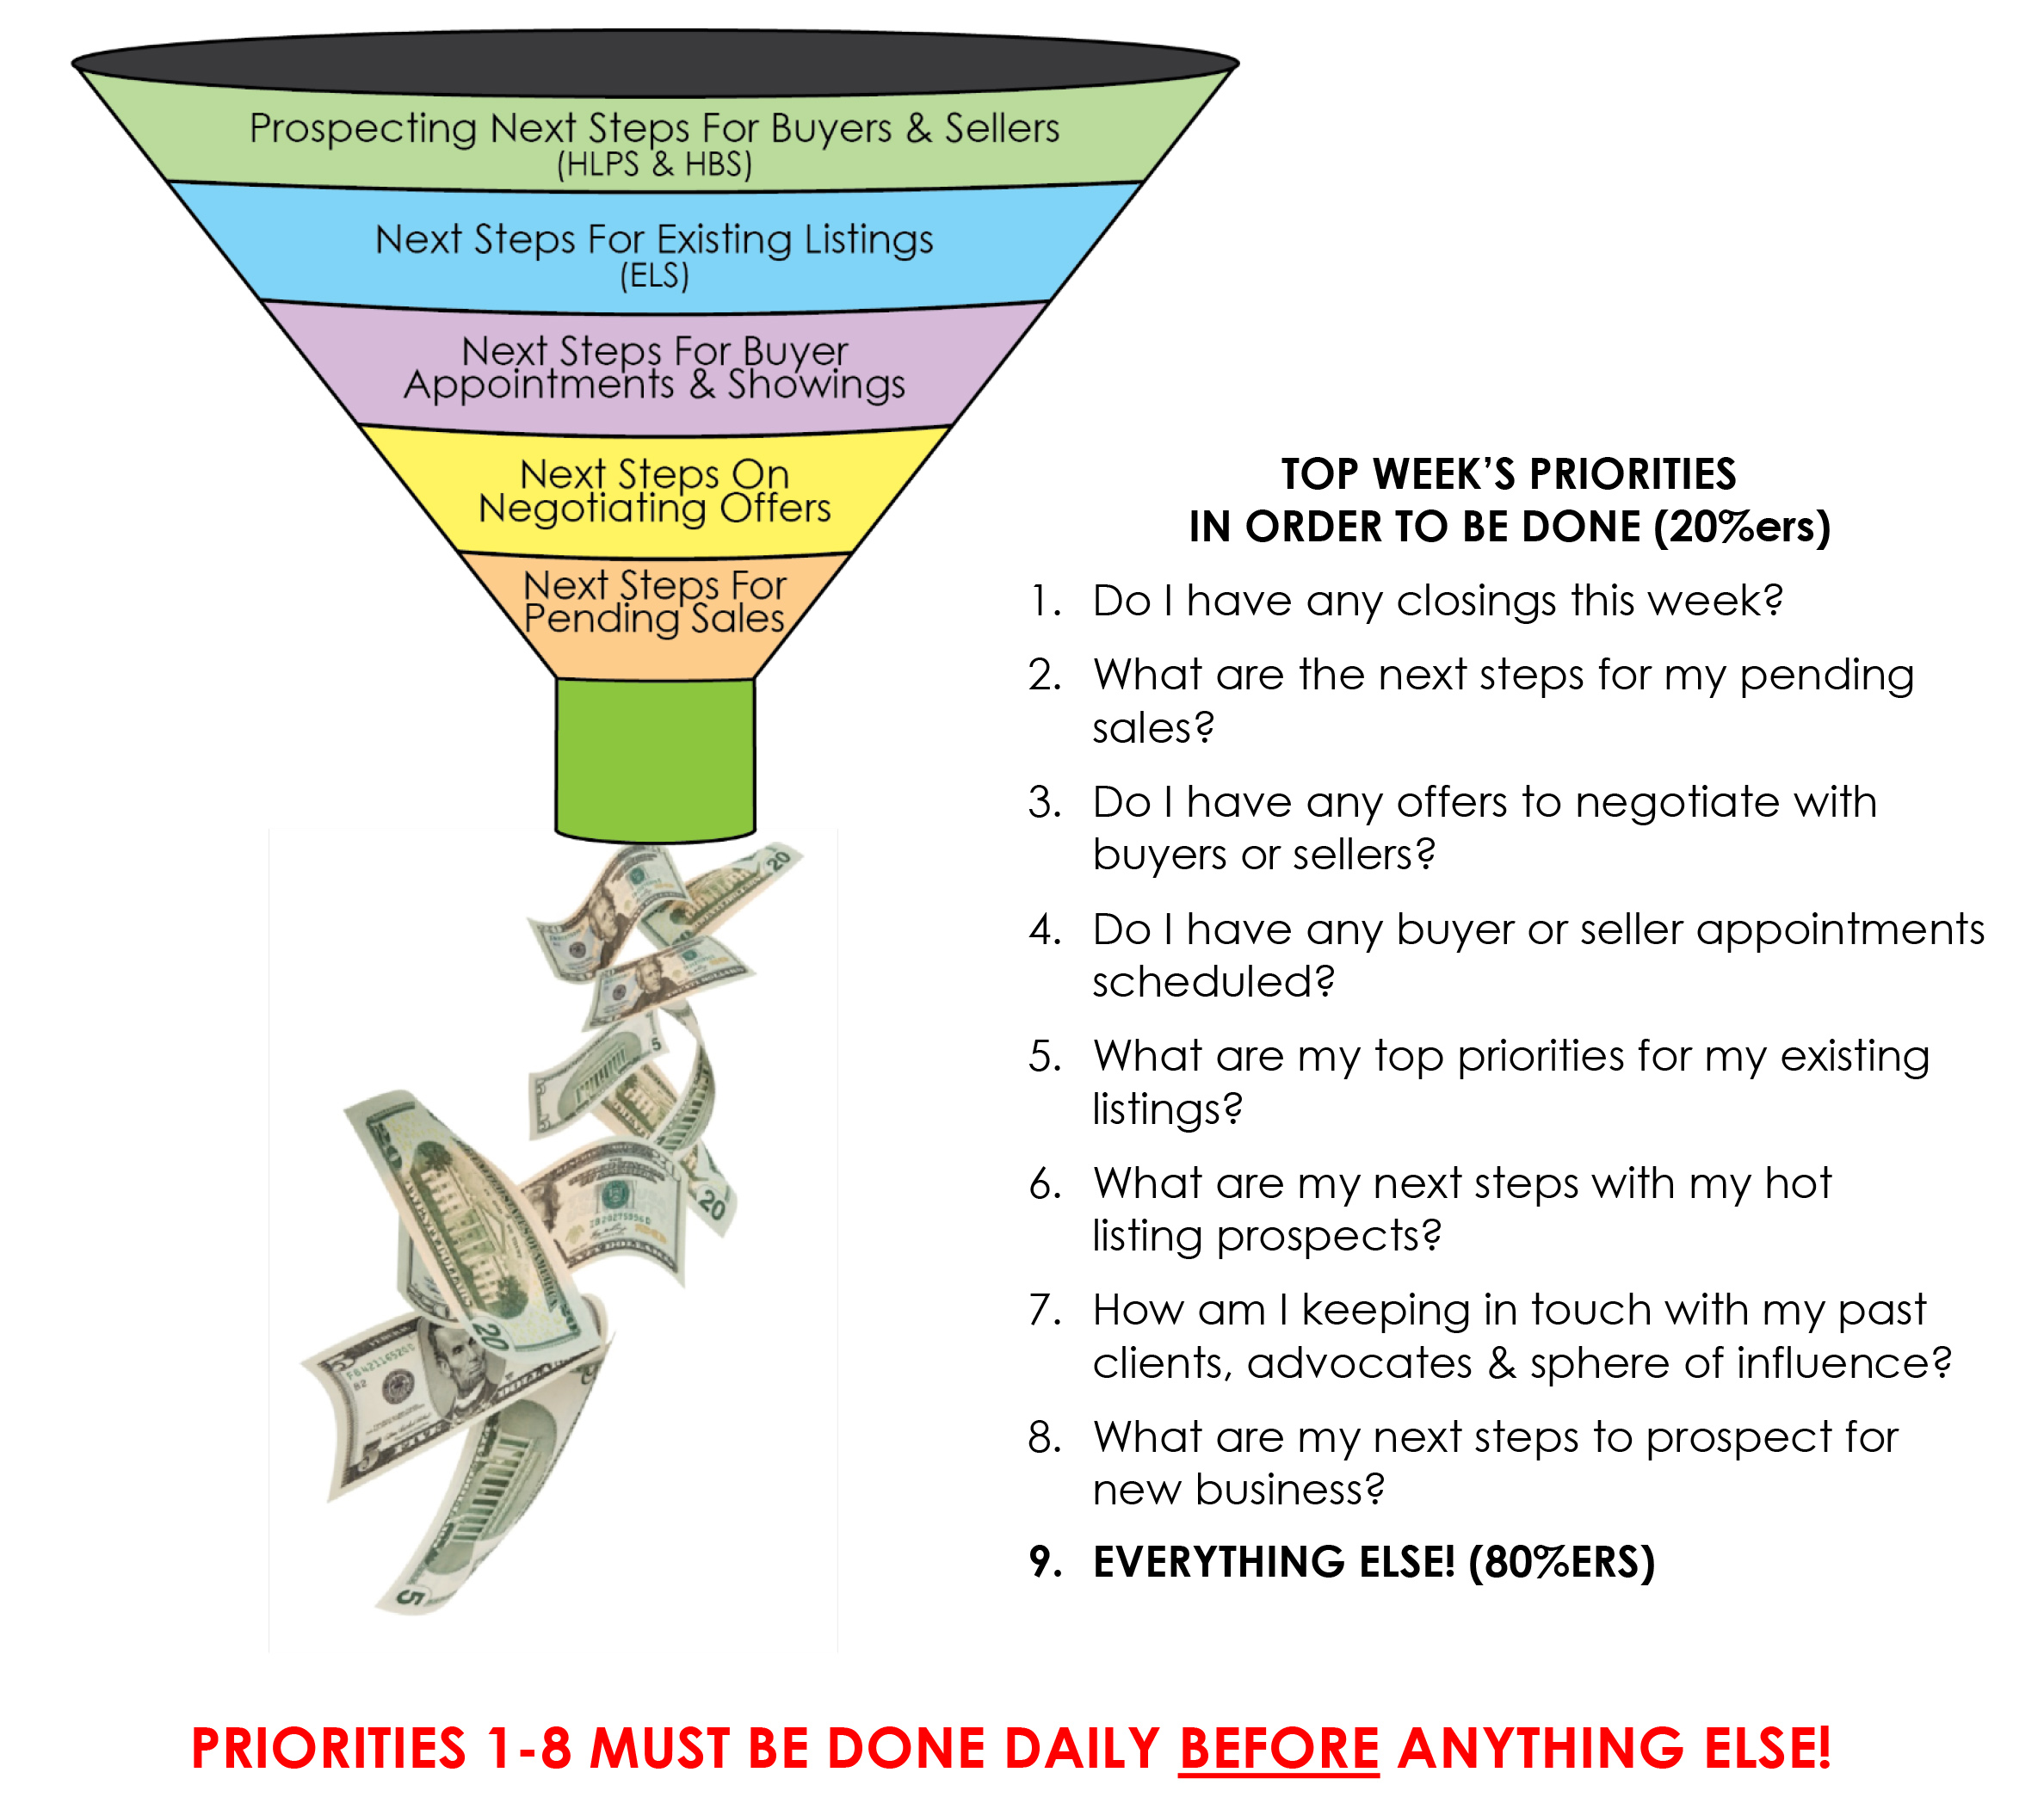 12-17-15 The Sales Funnel